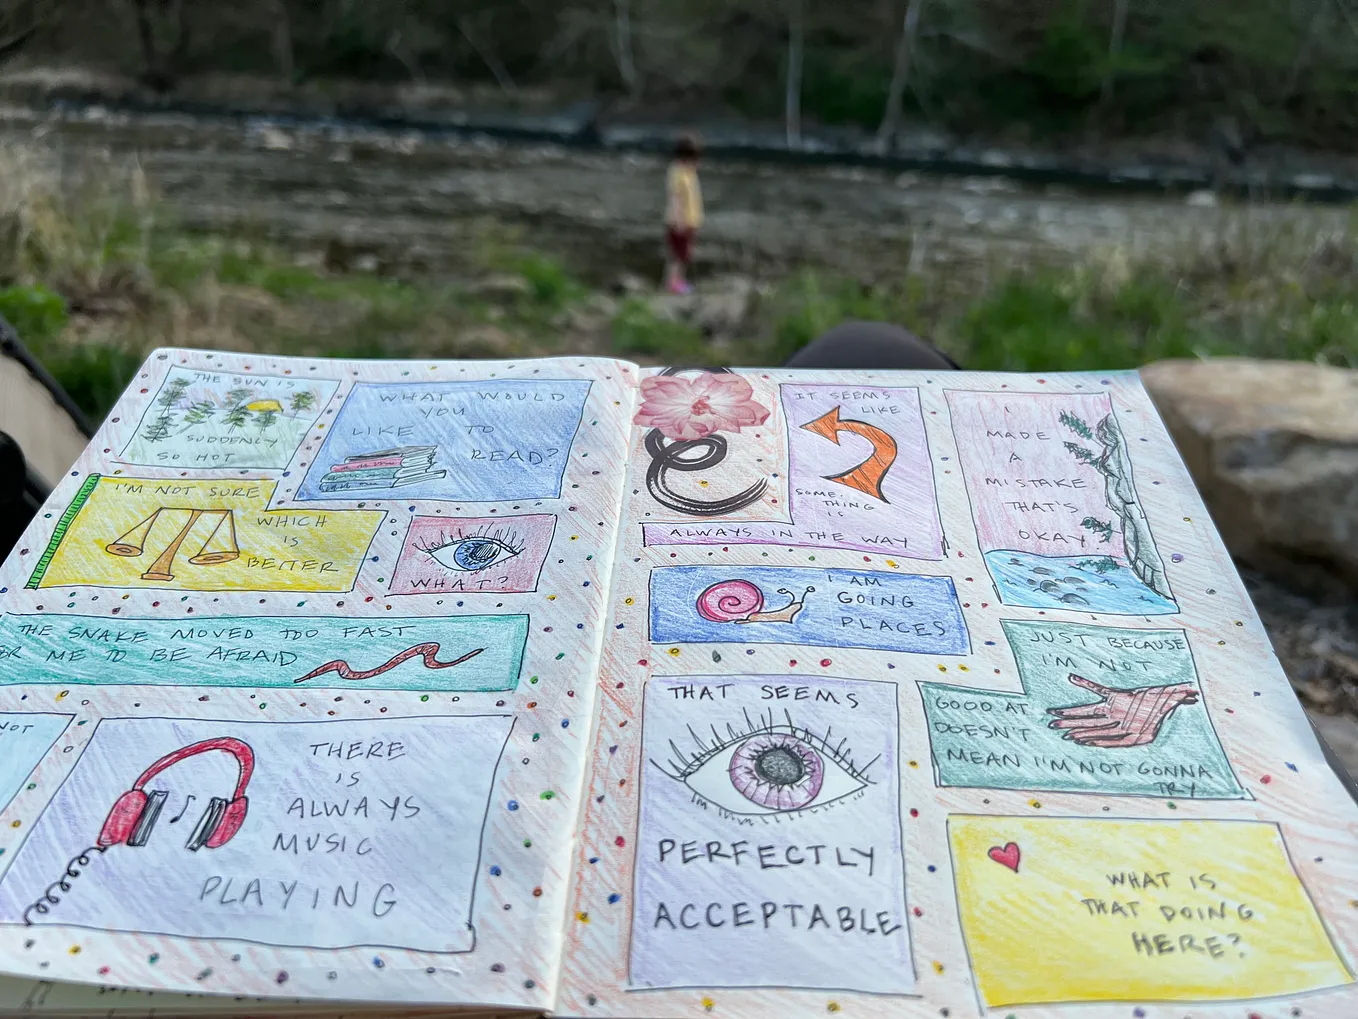 A notebook covered in colorful doodles, background of a river